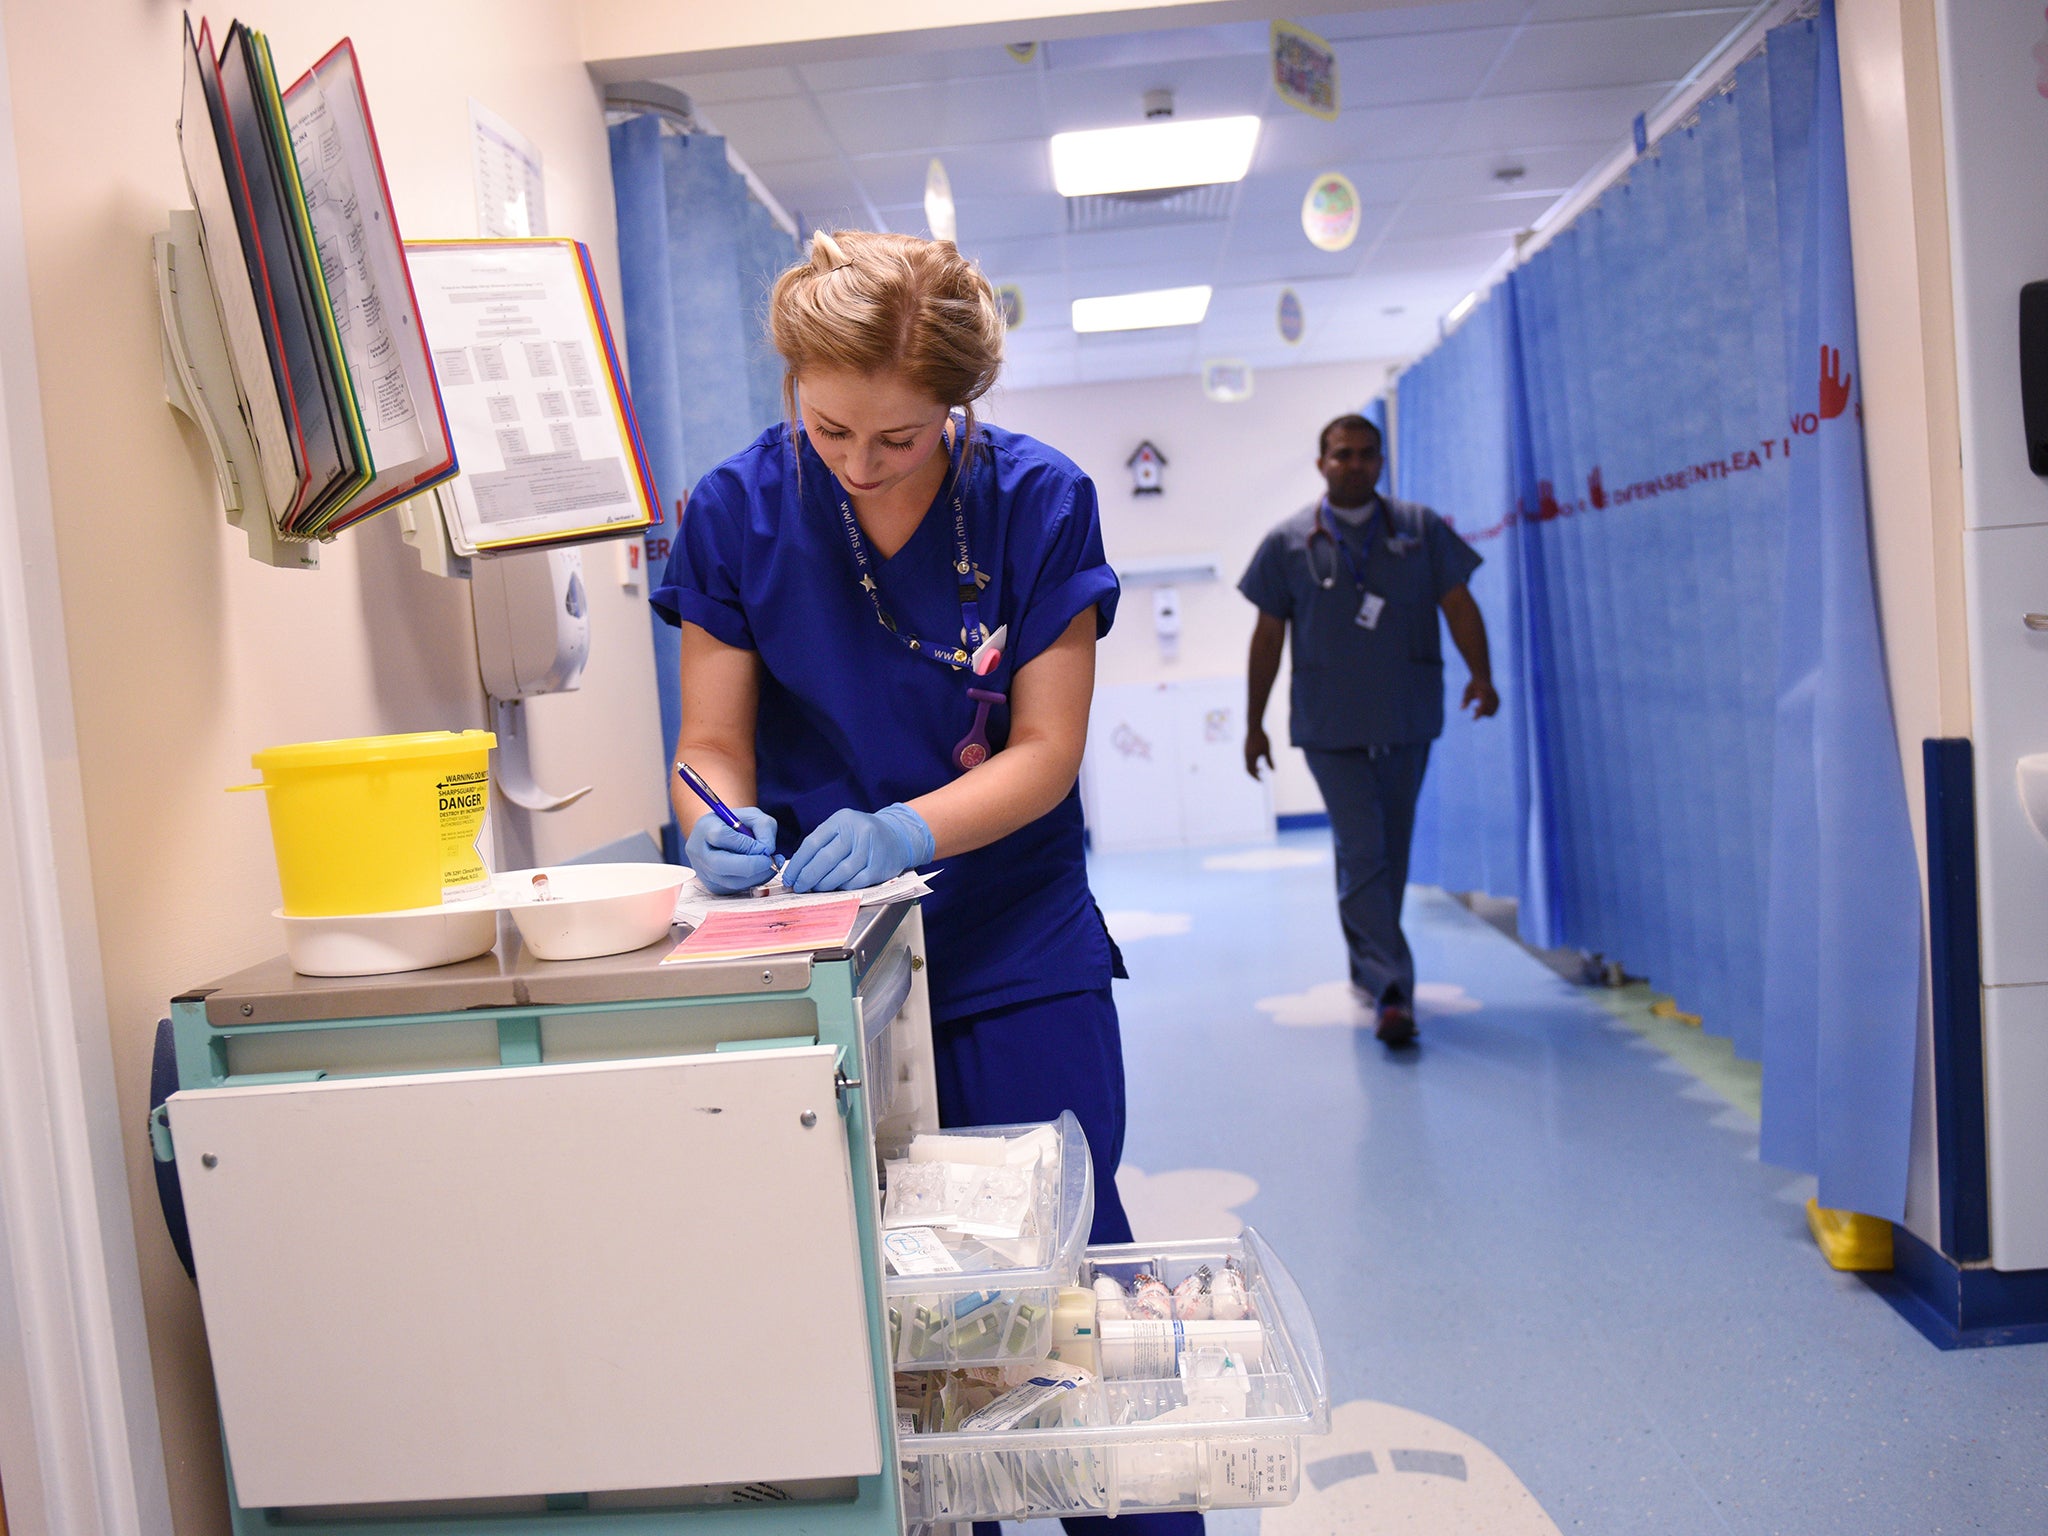 Health experts have warned the NHS is under huge strain